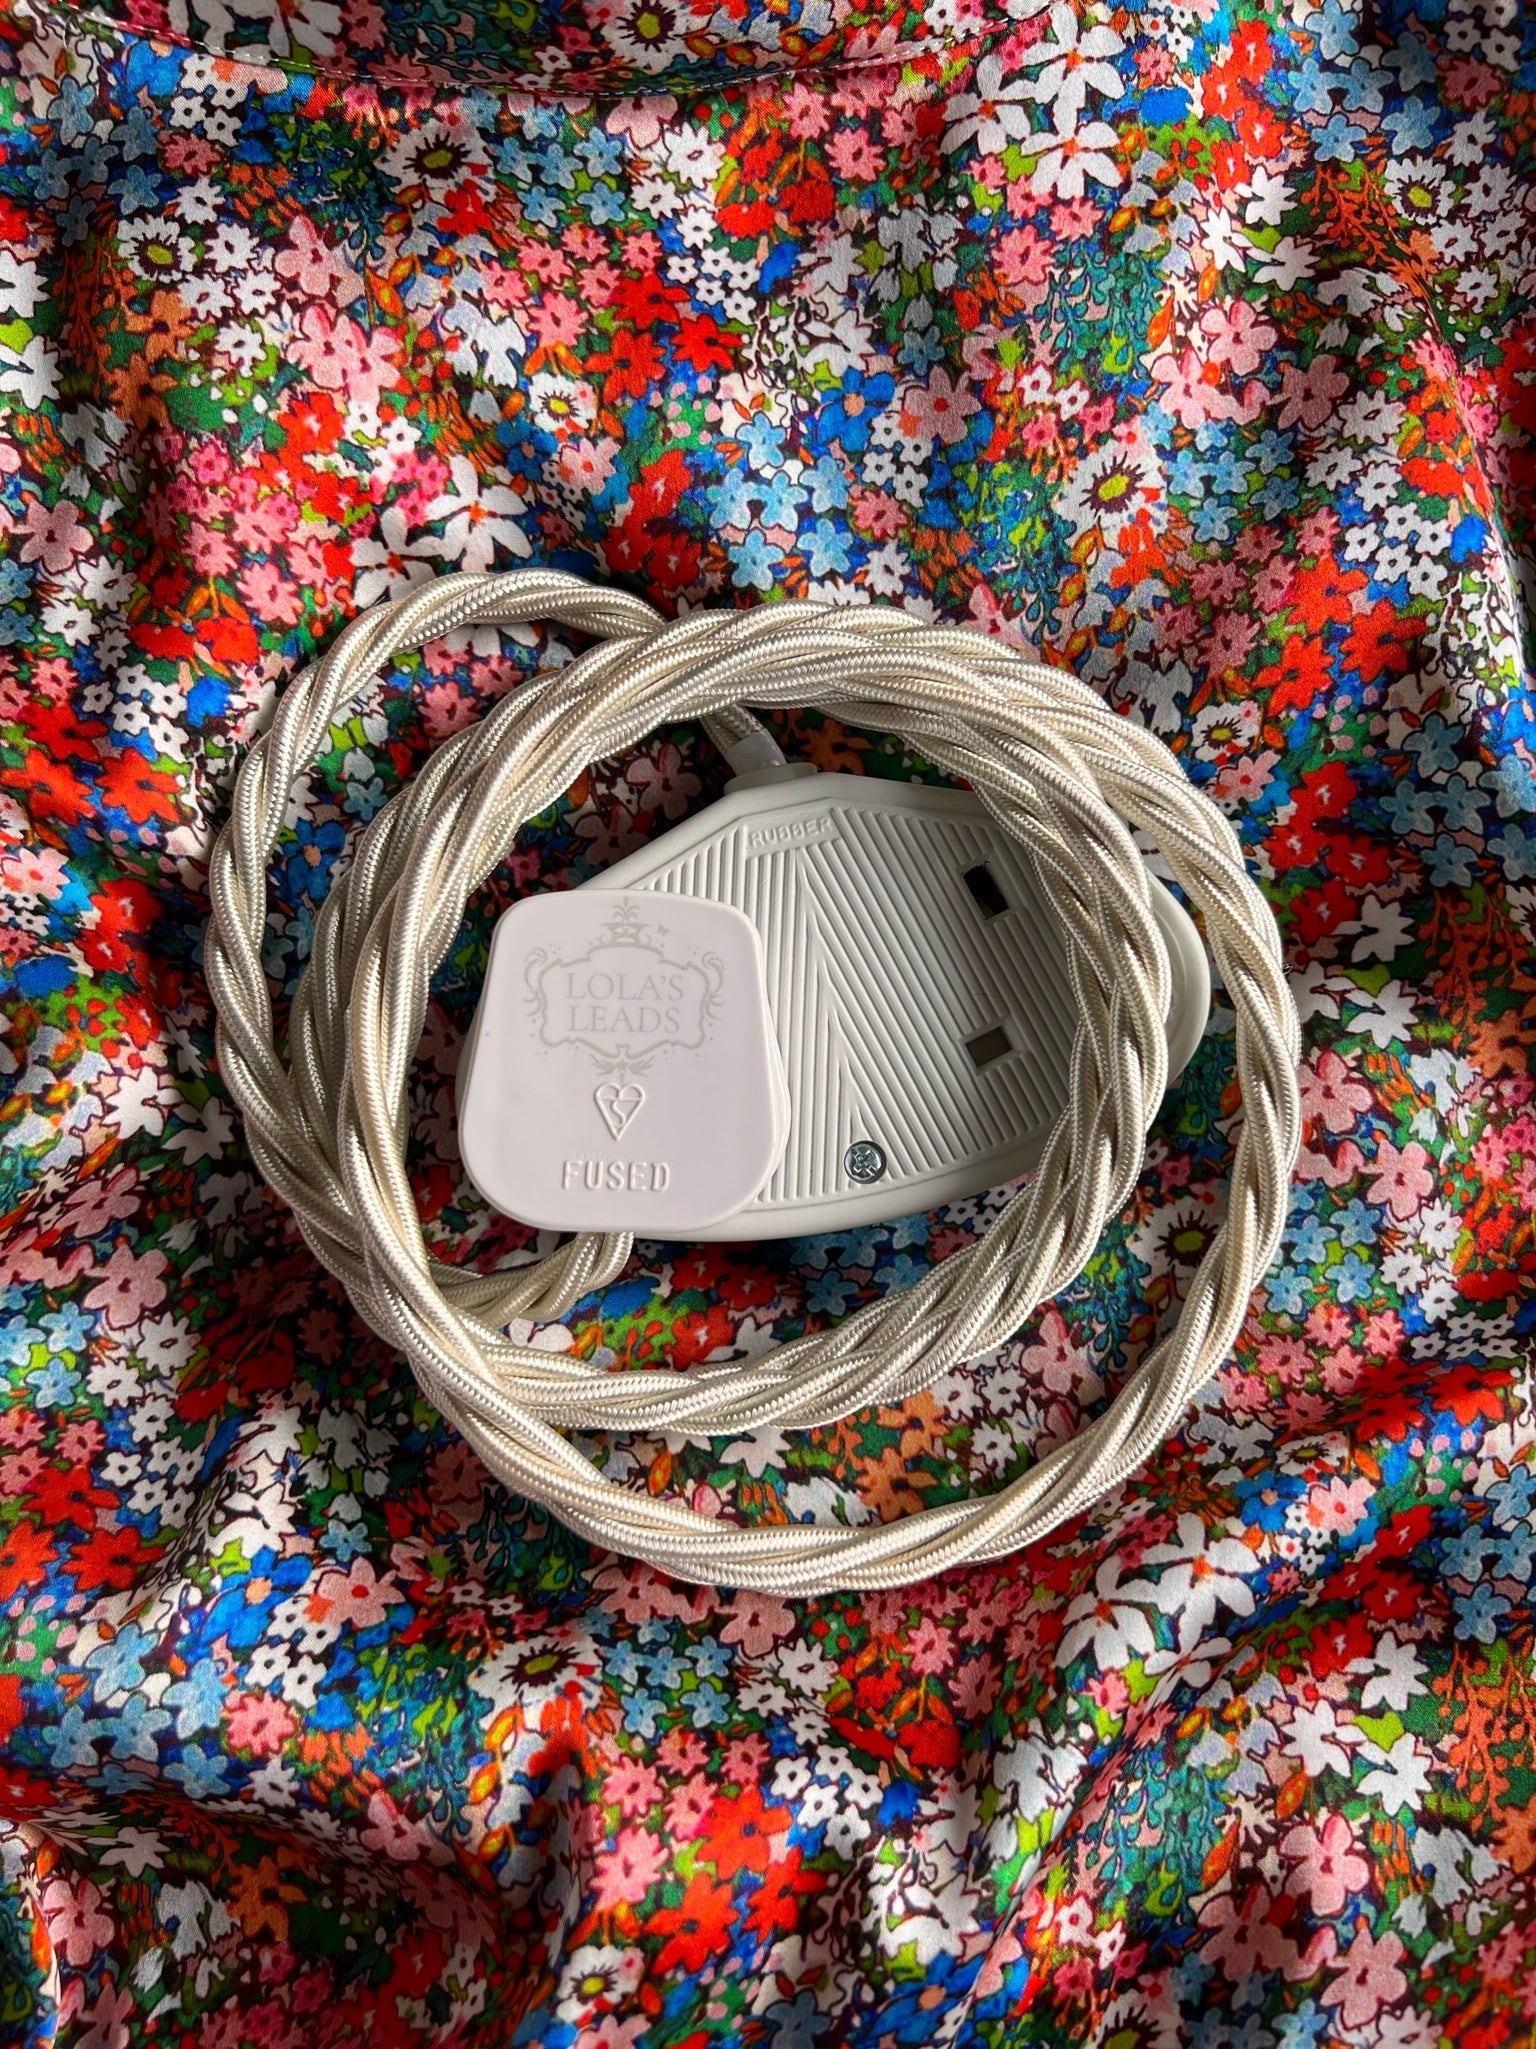 Clotted Cream - Lola's Leads Fabric Extension Cable